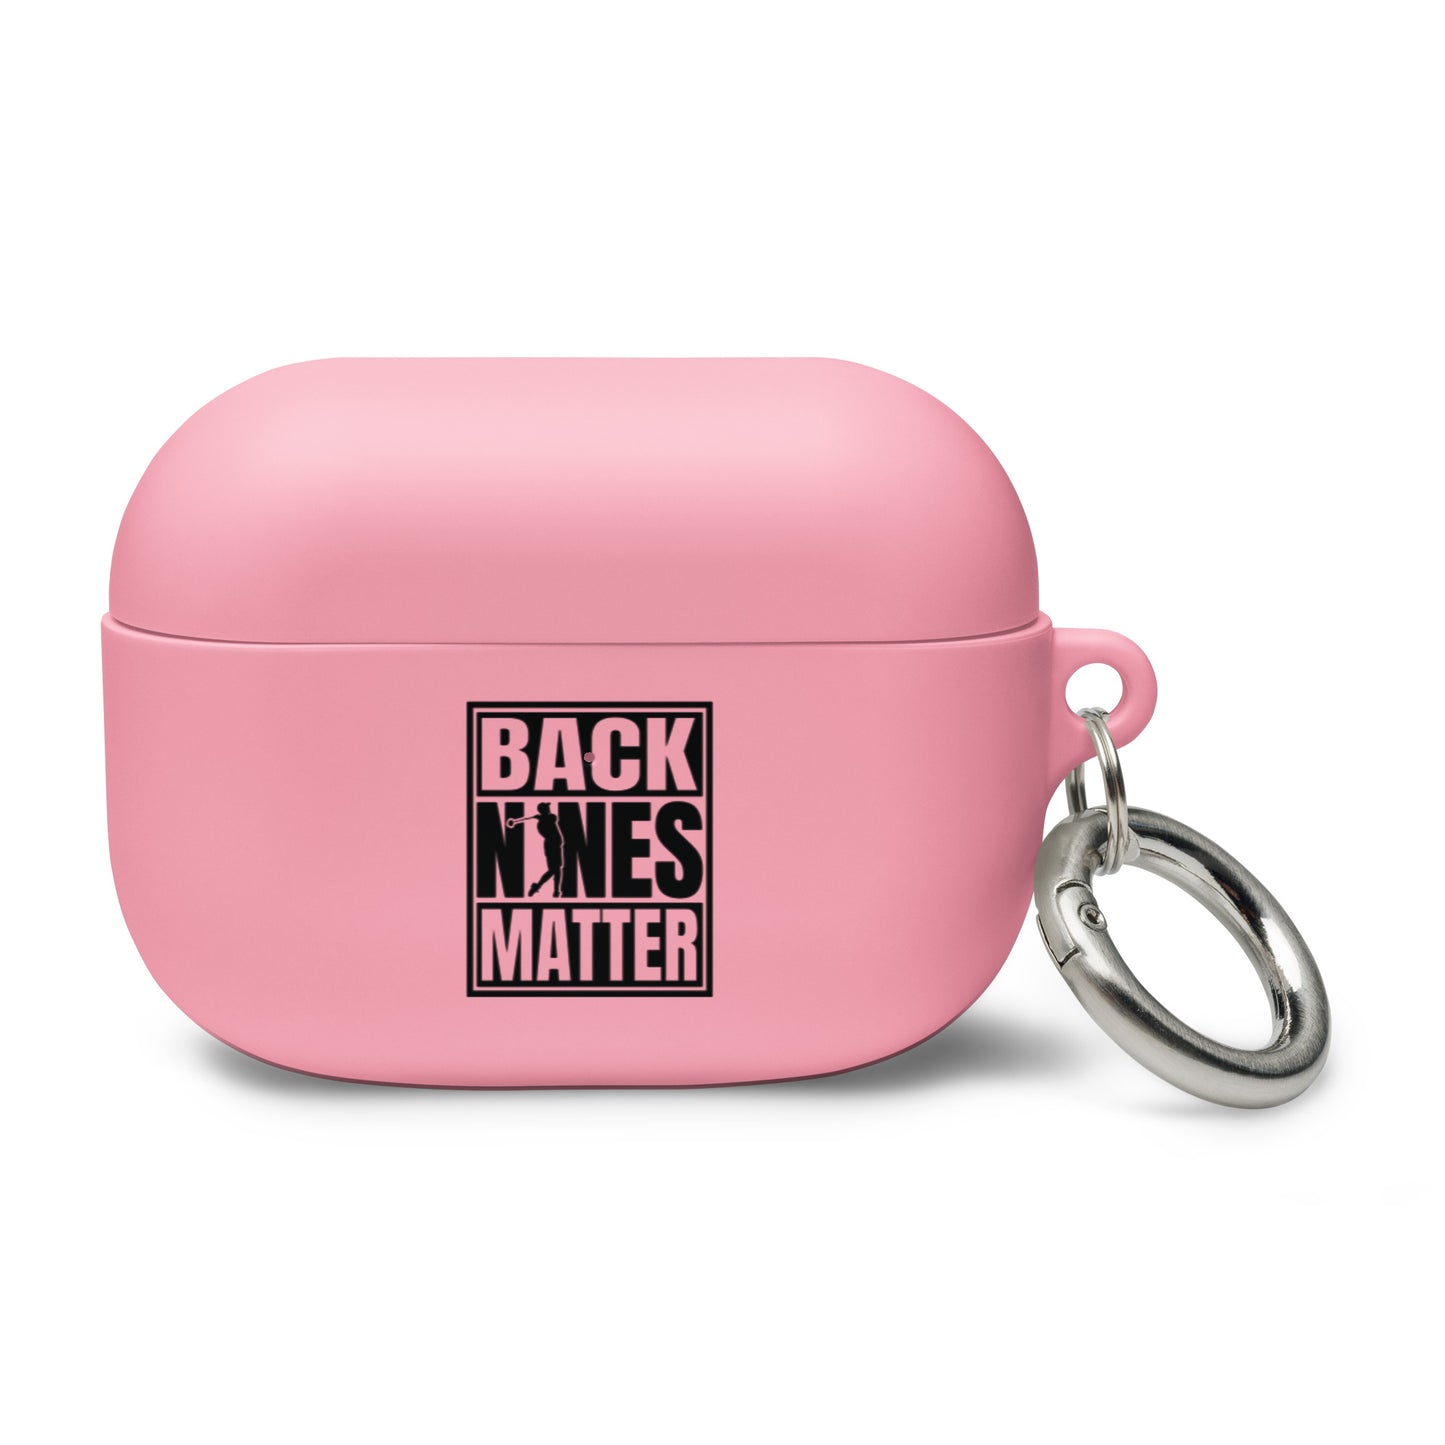 Back Nines Matter AirPods Case